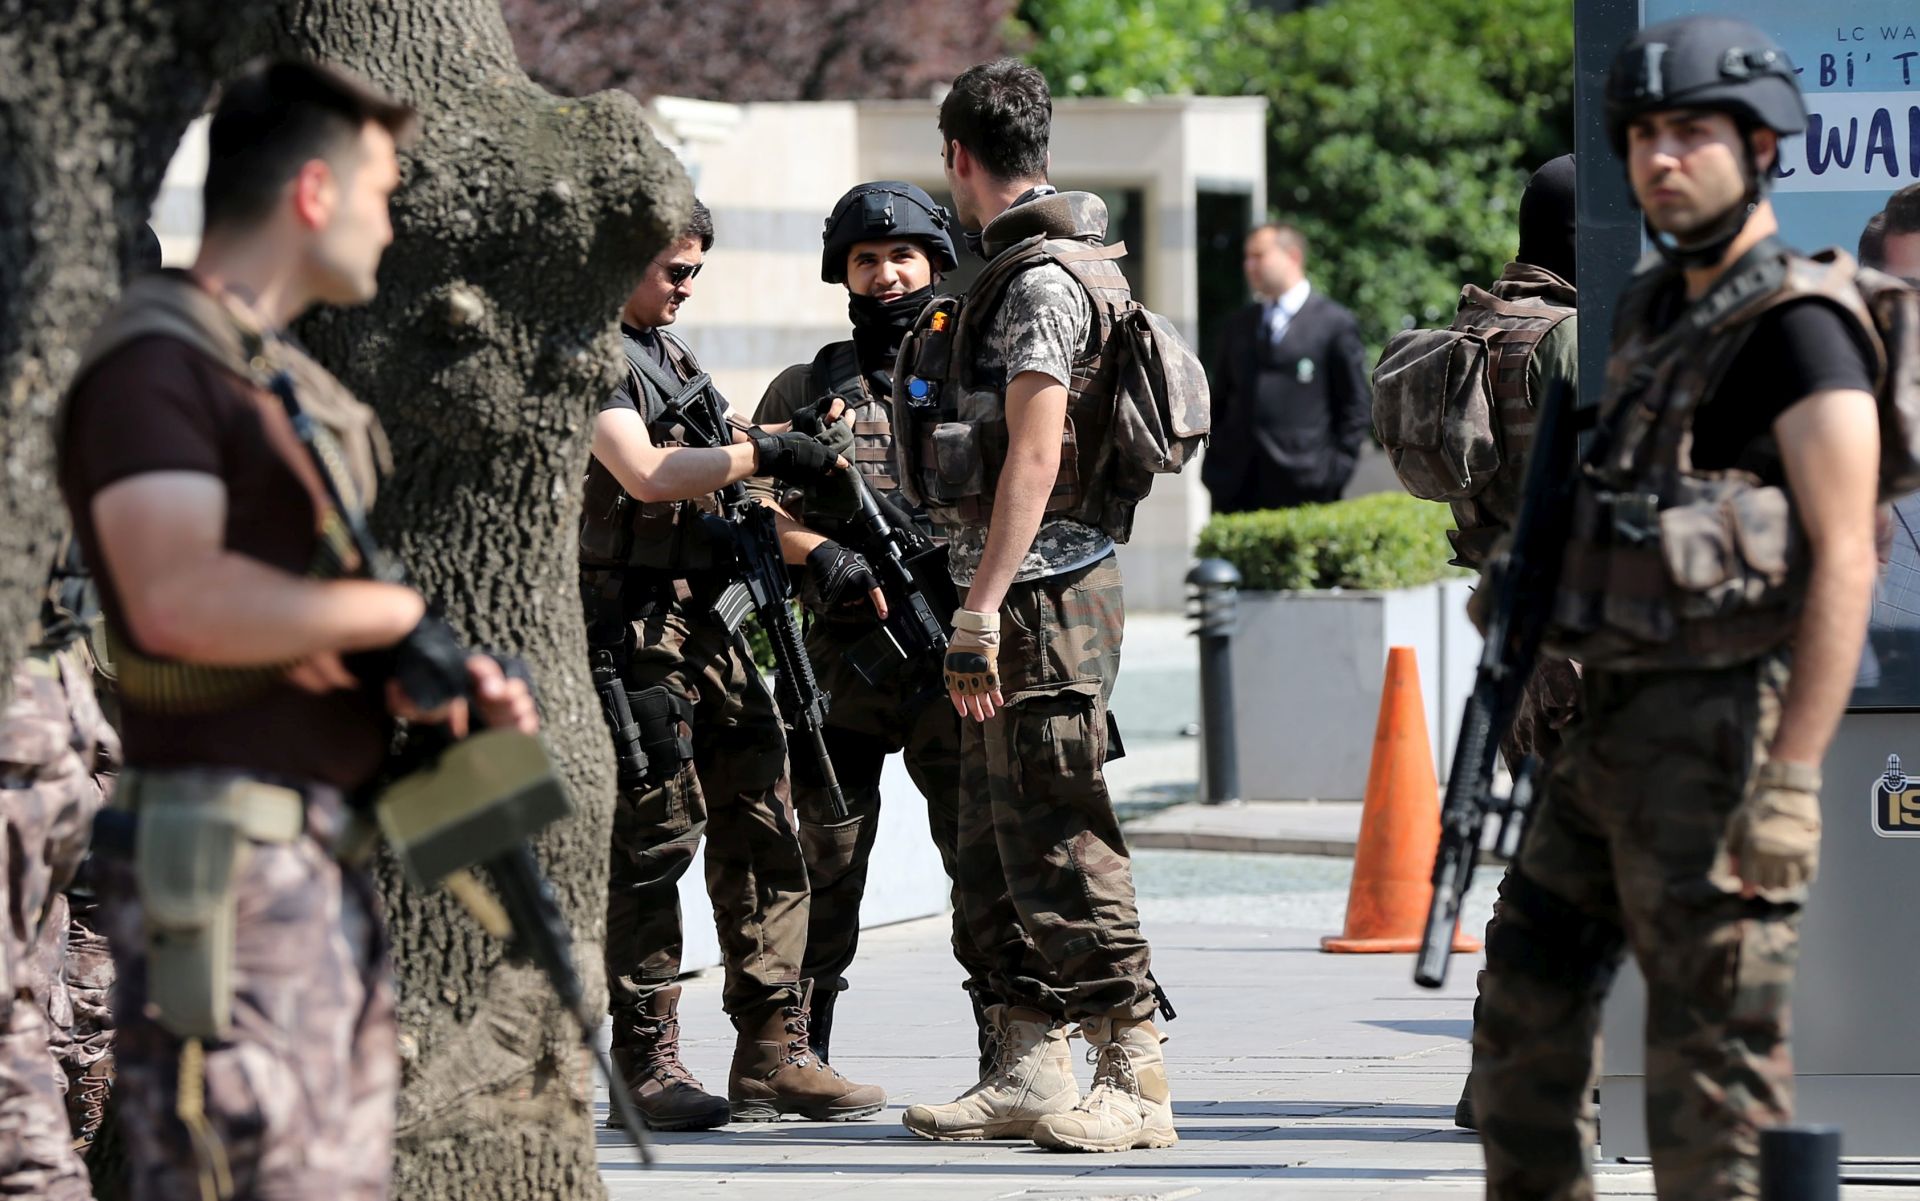 epa05430478 Turkish special forces members with heavy weapons secure the area during a security meeting between 1st Army Commander Gen. Umit Dundar and Istanbul Police Chief Mustafa Caliskan, in Istanbul, Turkey, 18 July 2016. Turkish Prime Minister Yildirim reportedly said that the Turkish military was involved in an attempted coup d'etat. Turkish President Recep Tayyip Erdogan has denounced the coup attempt as an 'act of treason' and insisted his government remains in charge. Some 104 coup plotters were killed, 90 people - 41 of them police and 47 are civilians - 'fell martrys', after an attempt to bring down the Turkish government, the acting army chief General Umit Dundar said in a televised appearance.who were killed in a coup attempt on 16 July, during the funeral, in Istanbul, Turkey, 17 July 2016. Turkish Prime Minister Yildirim reportedly said that the Turkish military was involved in an attempted coup d'etat. Turkish President Recep Tayyip Erdogan has denounced the coup attempt as an 'act of treason' and insisted his government remains in charge. Some 104 coup plotters were killed, 90 people - 41 of them police and 47 are civilians - 'fell martrys', after an attempt to bring down the Turkish government, the acting army chief General Umit Dundar said in a televised appearance.  EPA/TOLGA BOZOGLU